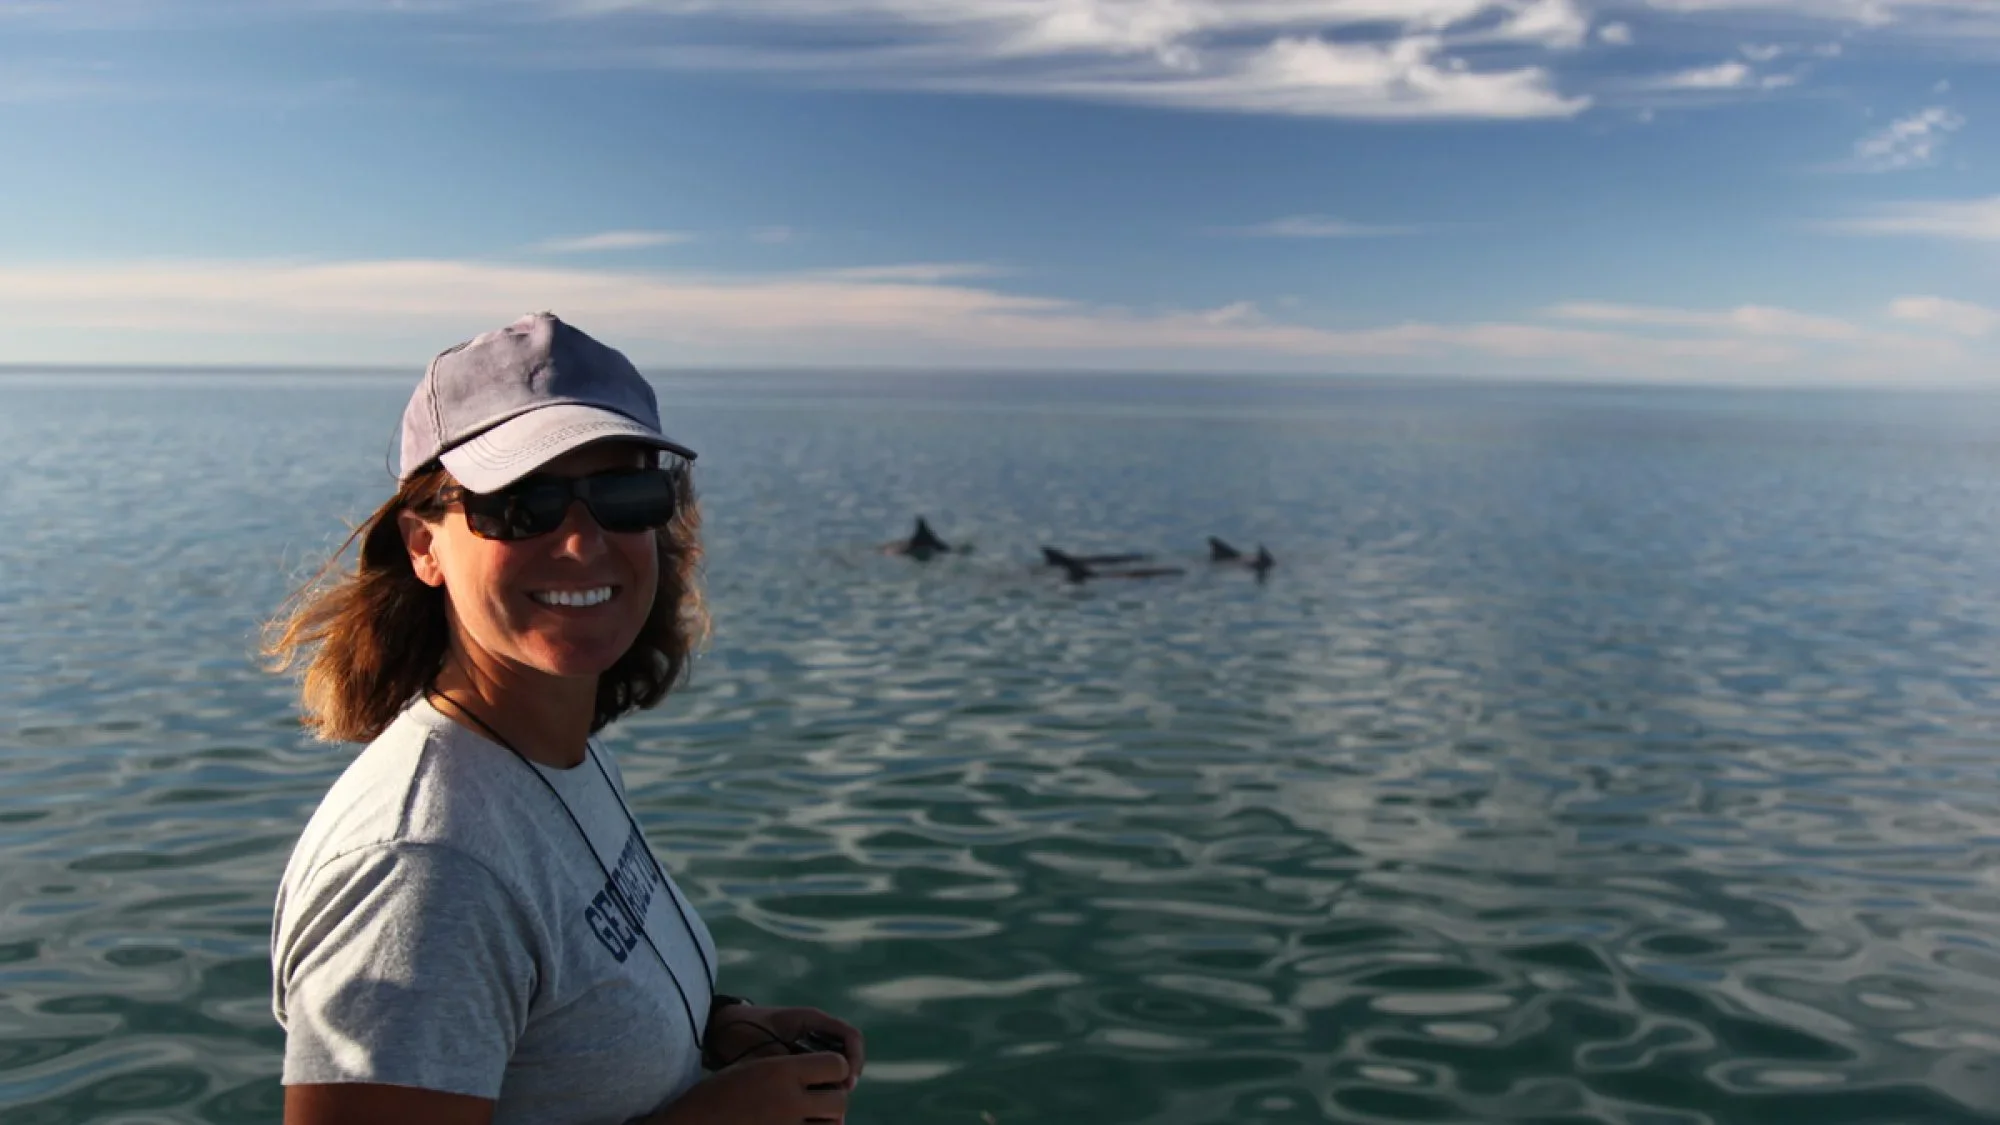 A woman with medium-length dark hair wears a gray Georgetown tee shirt and a gray hat. She is also wearing sunglasses and smiling at the camera. Behind her is a wide body of water.